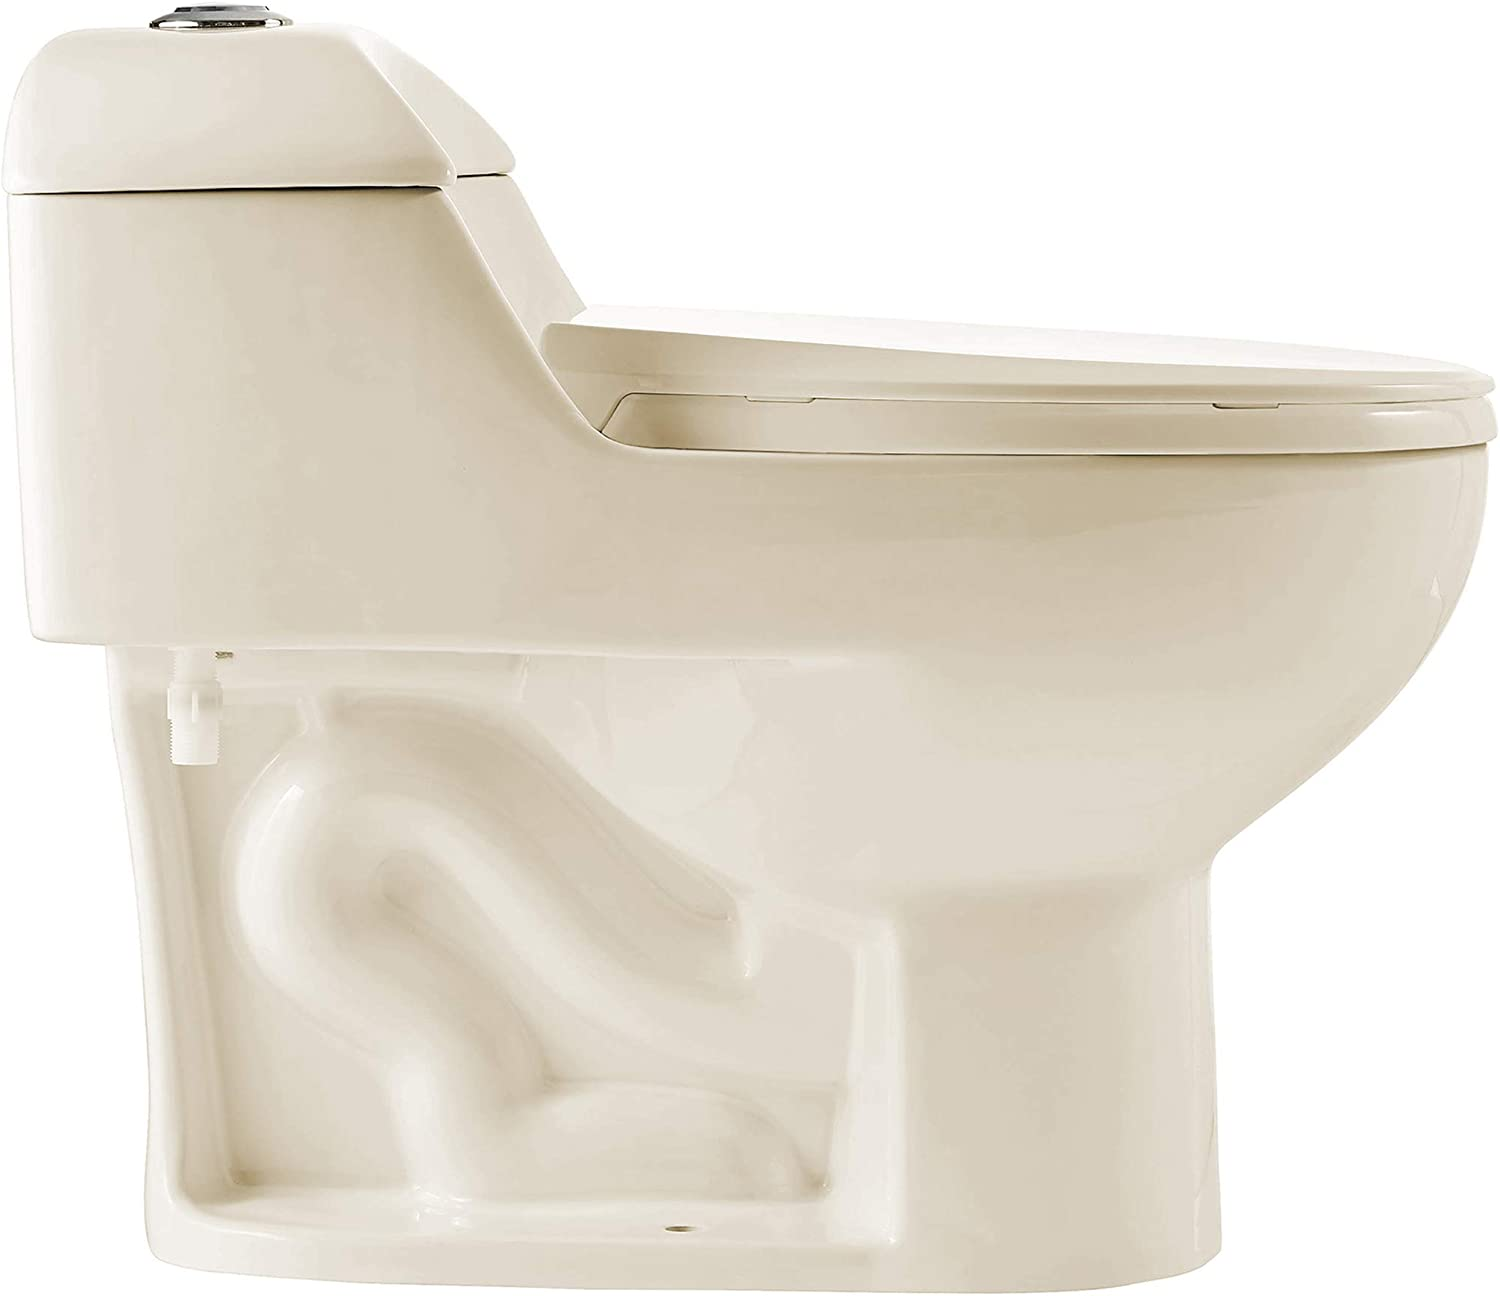 Swiss Madison Well Made Forever SM-1T803BQ Chateau One Piece Elongated Dual Flush Toilet In Bisque 0.8/1.28 gpf